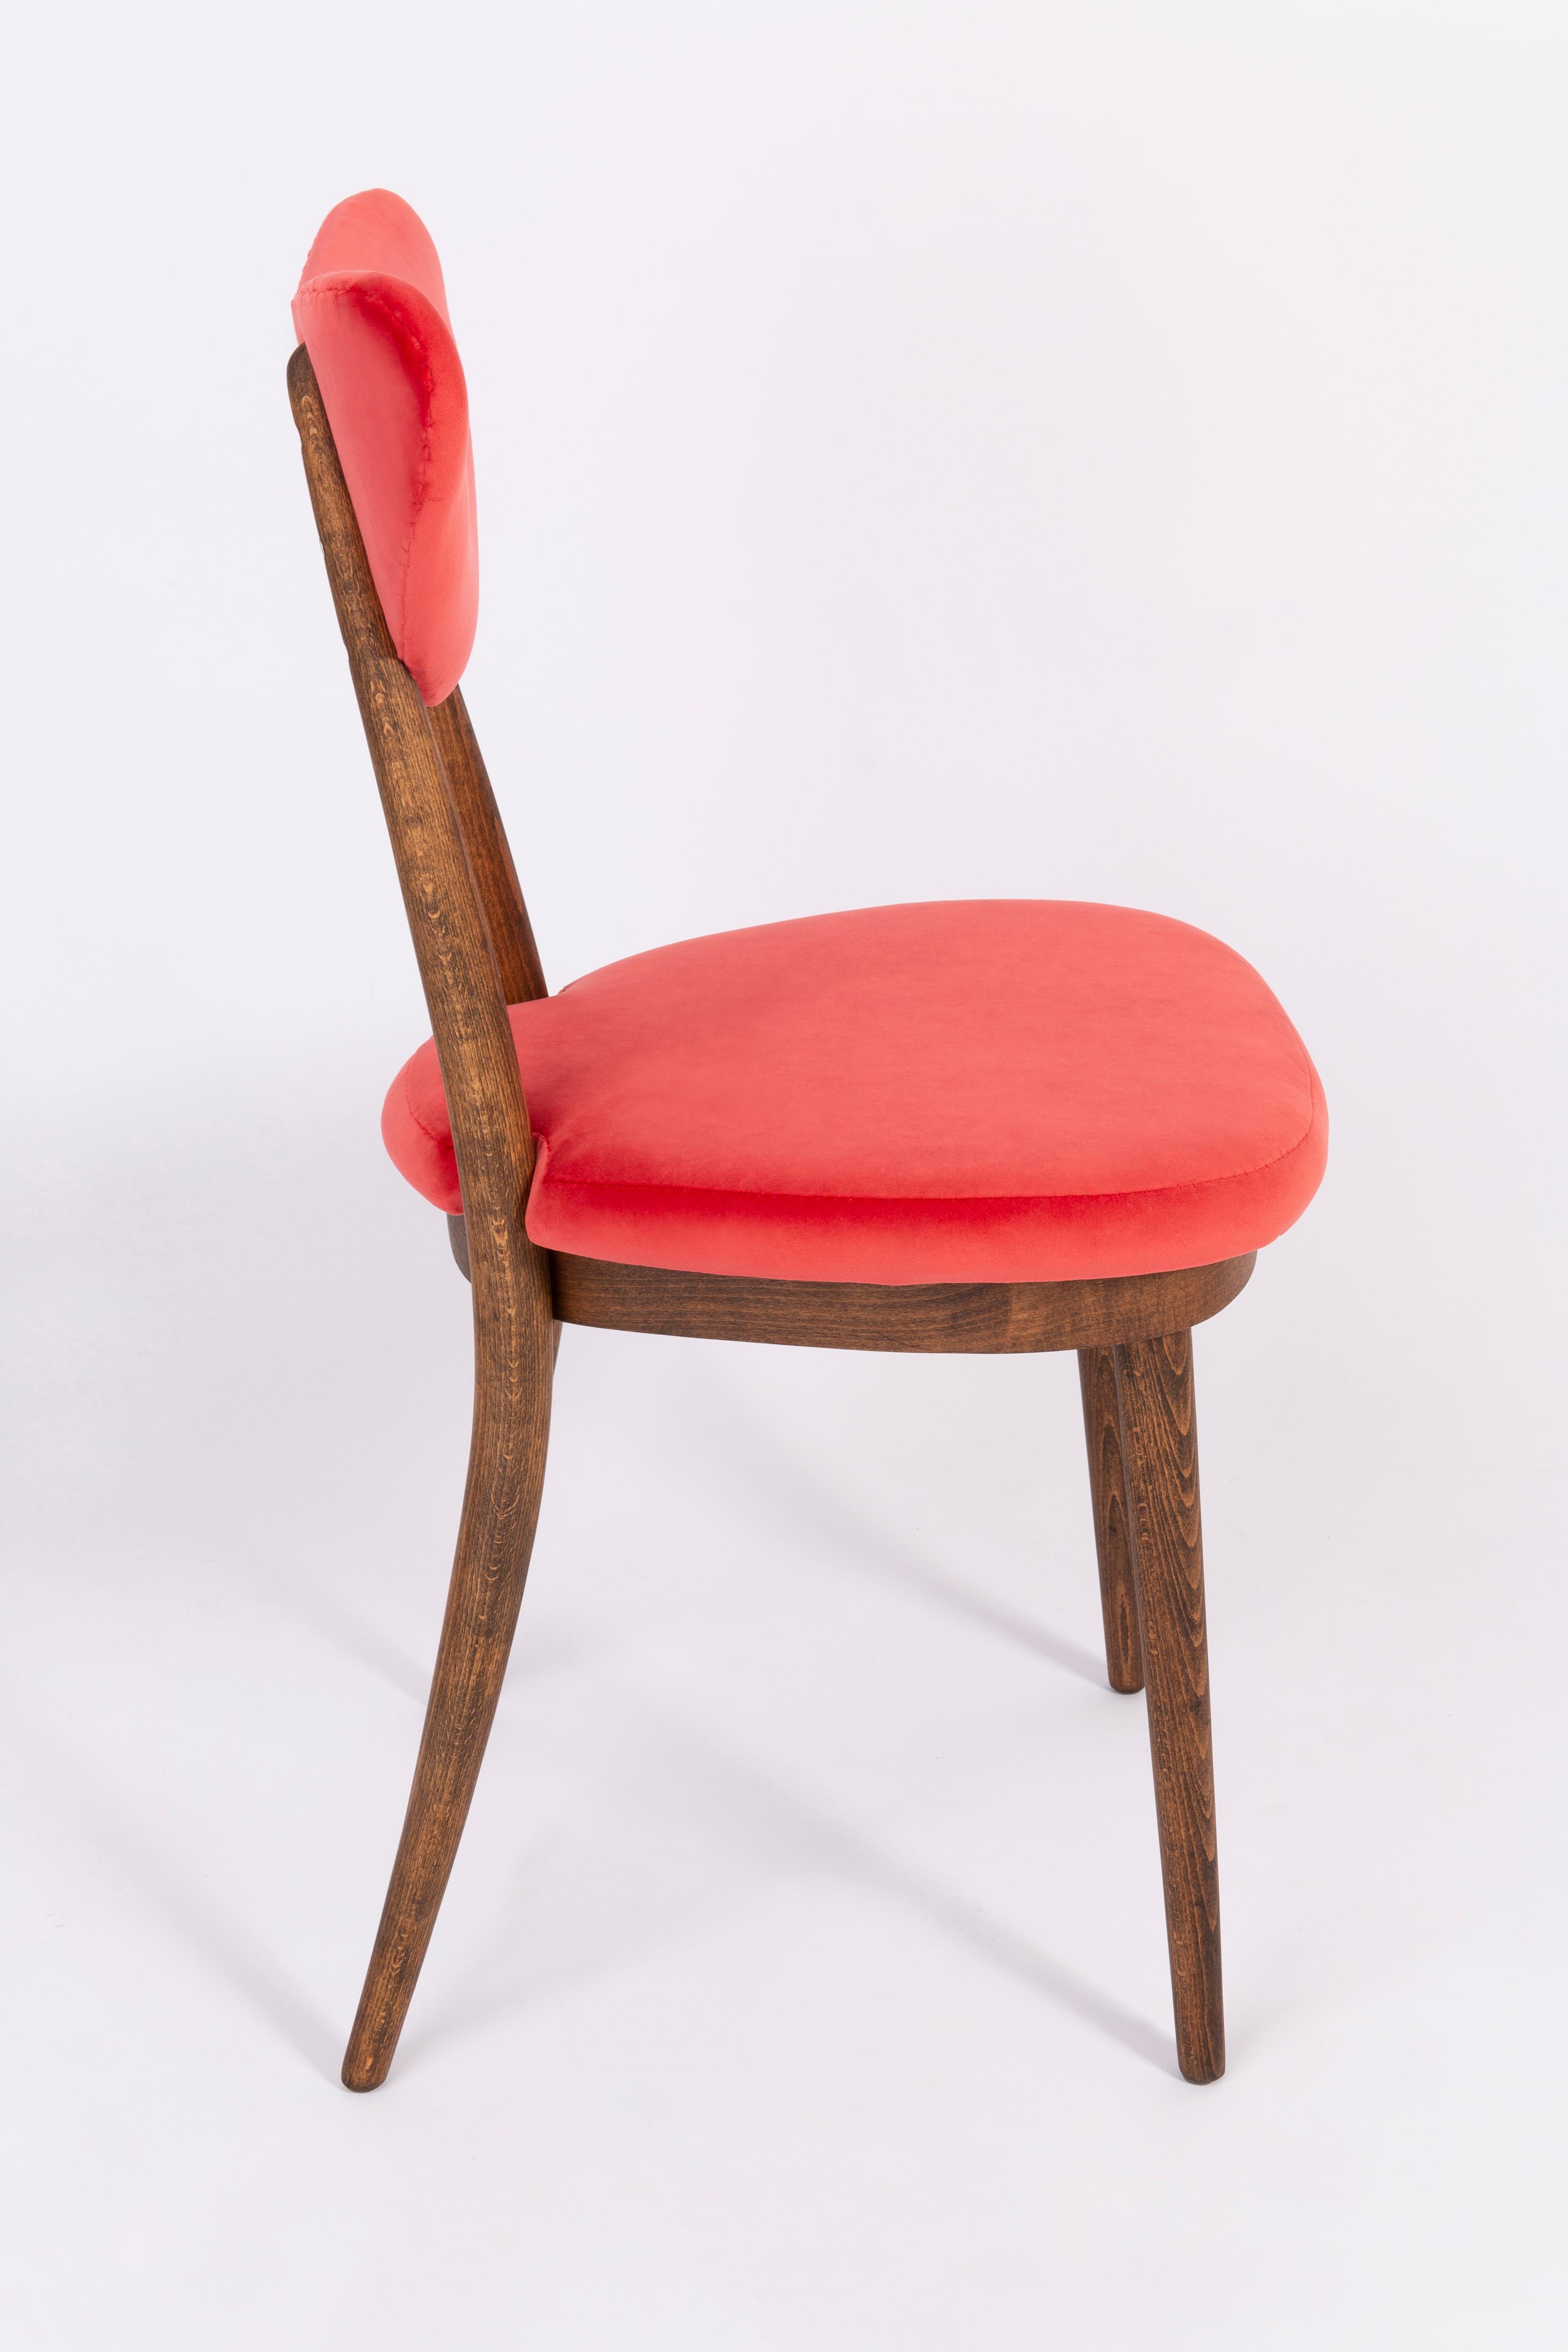 Pair of Red Heart Chairs, Poland, 1960s For Sale 3